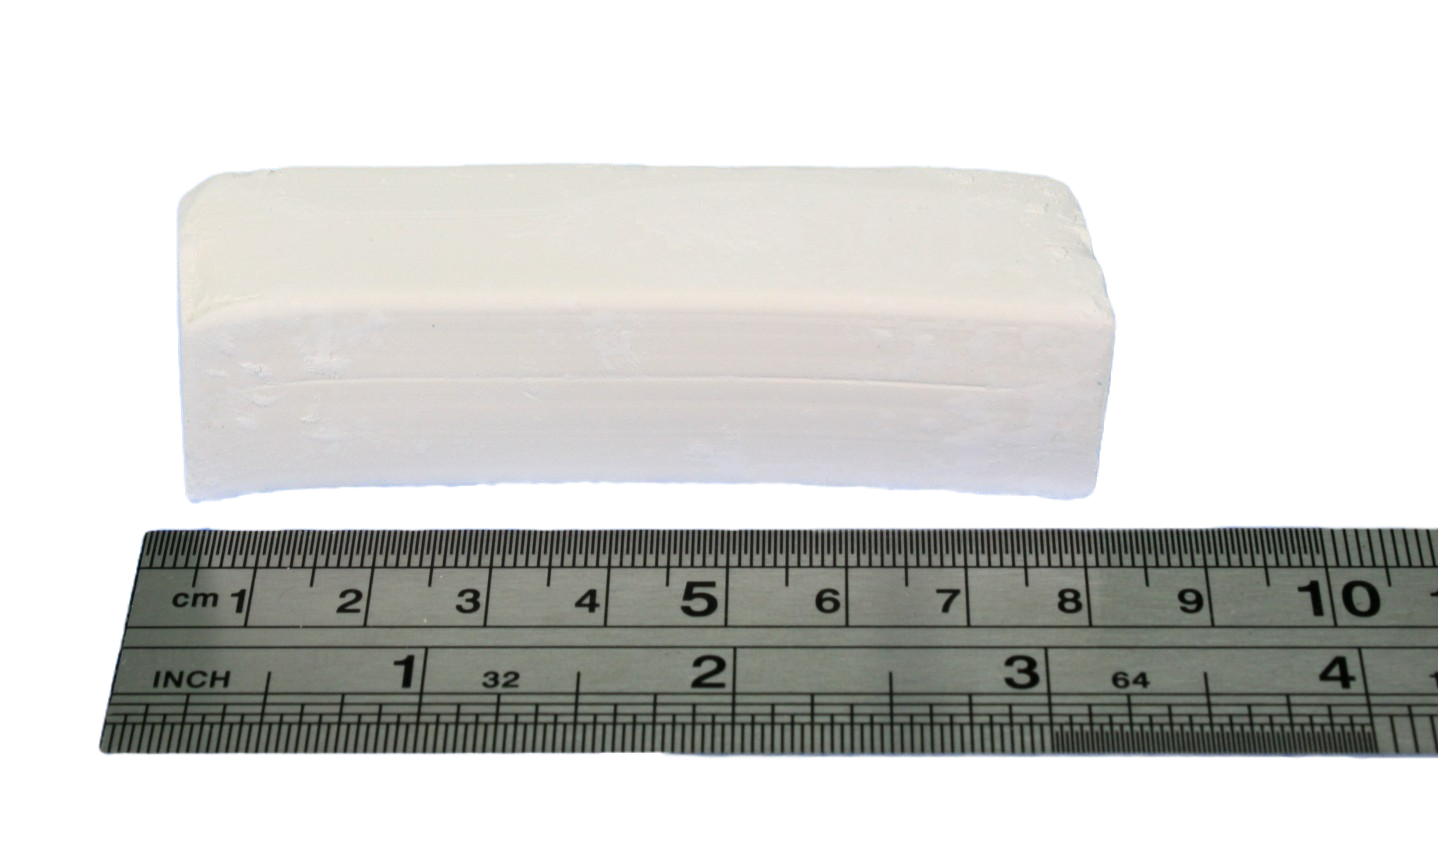 A piece of chalk next to a ruler, showing the total length to be just over 8cm